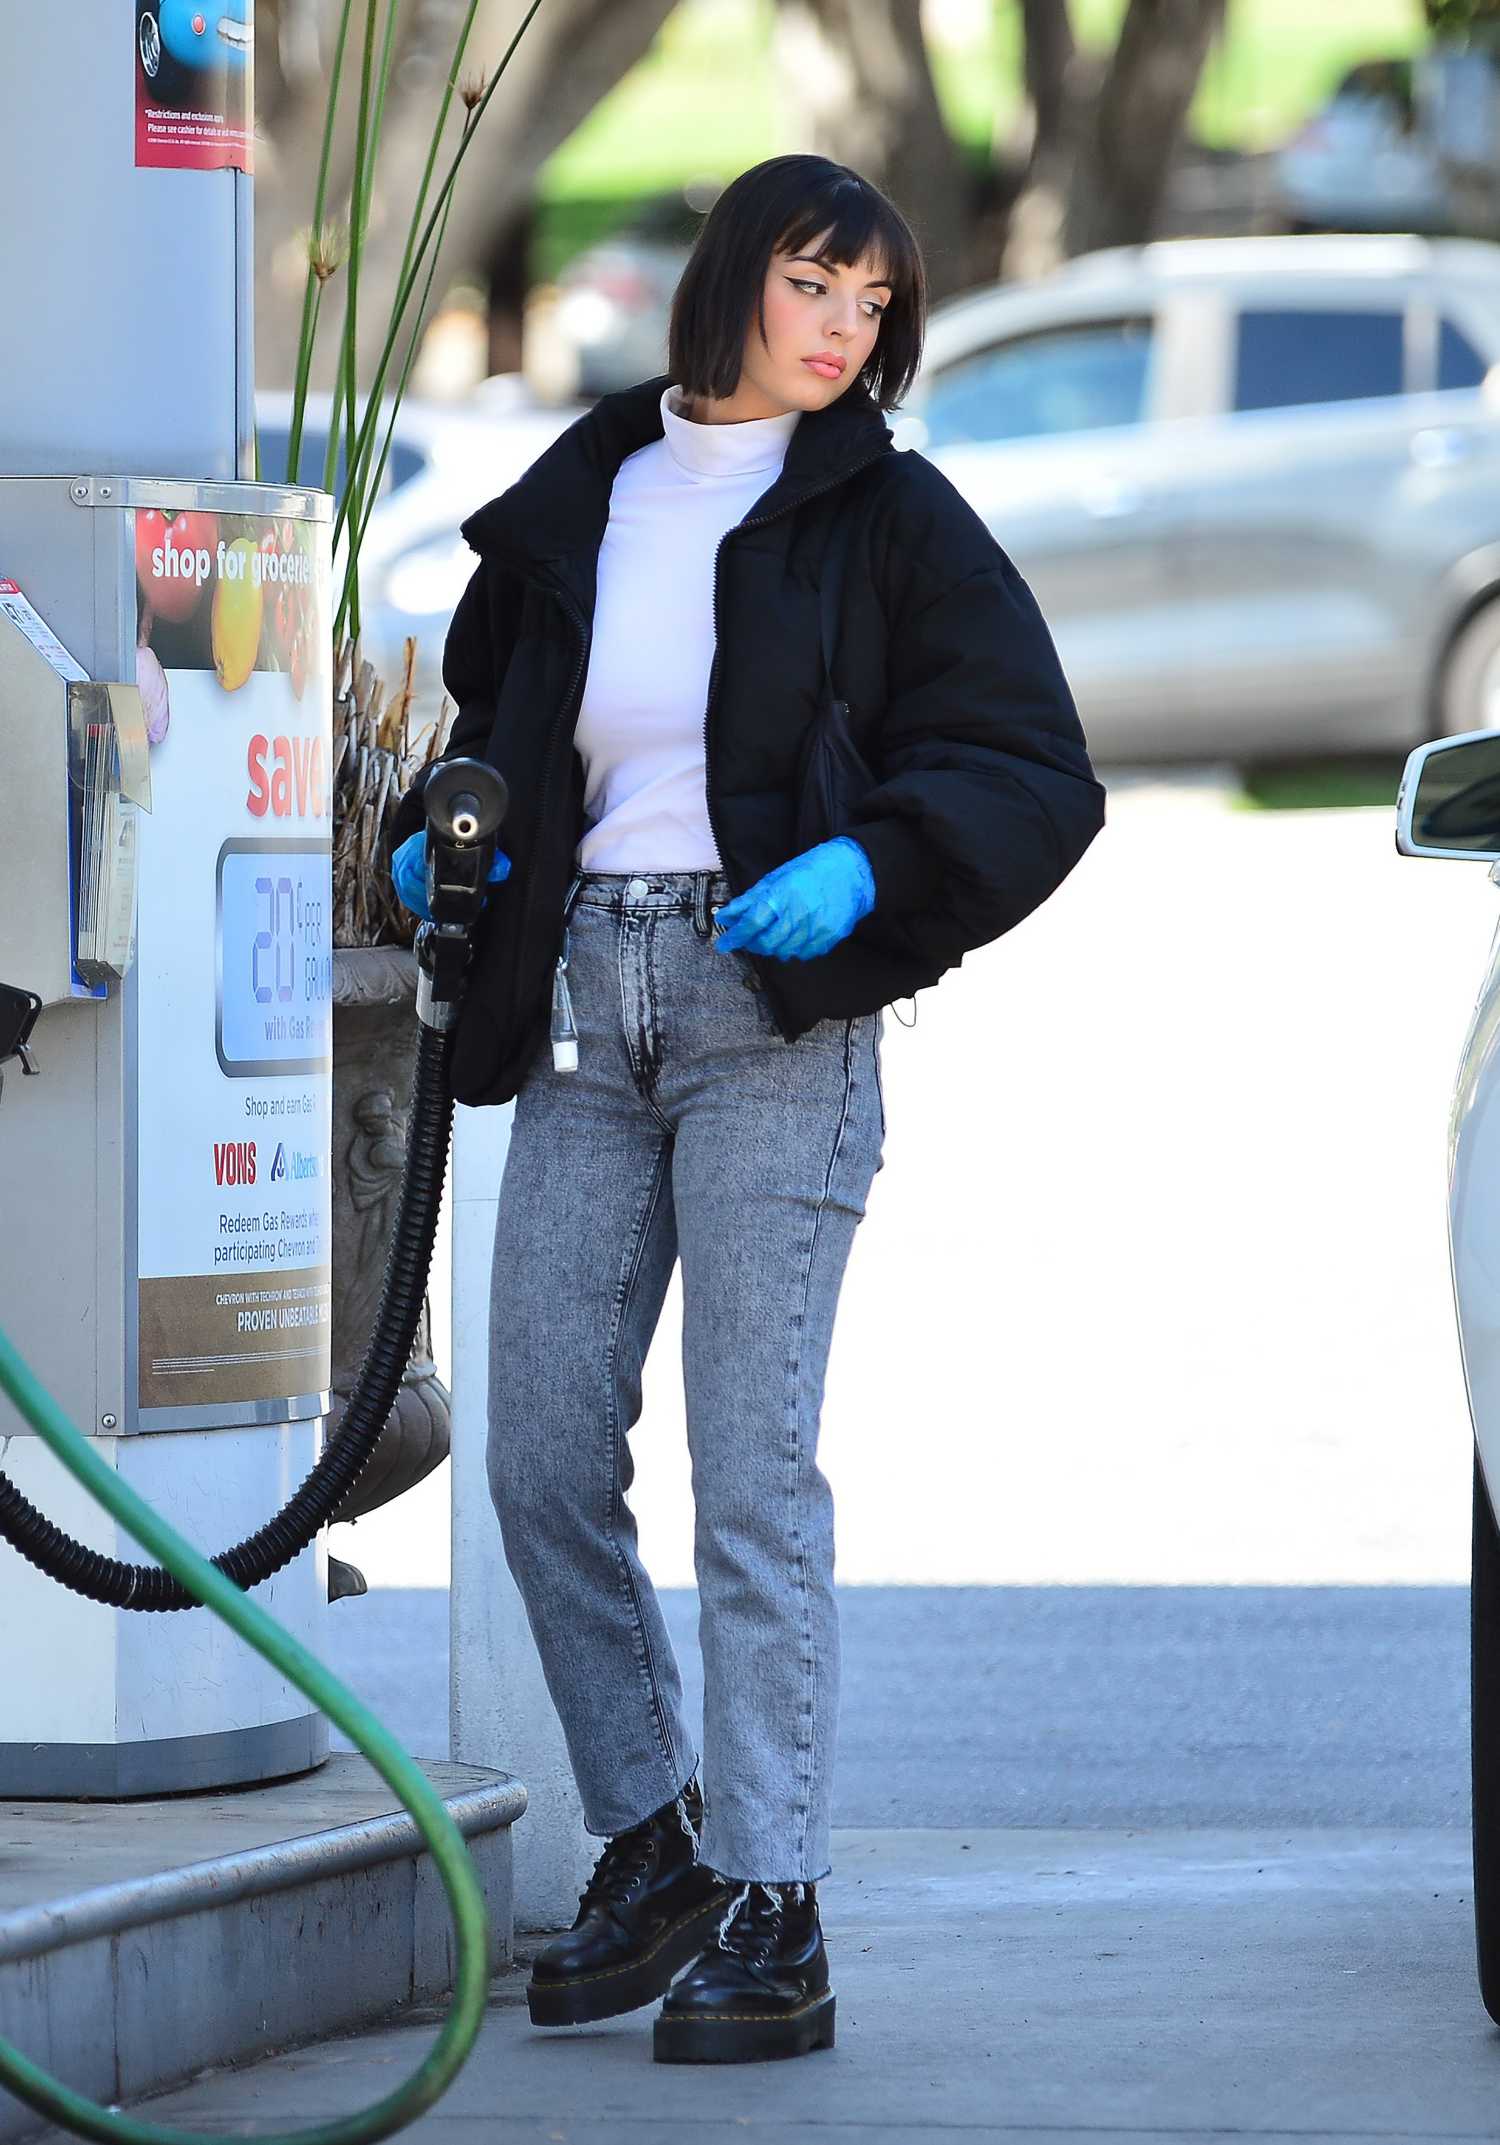 Rebecca Black in a Bright Blue Latex Gloves Pumps Gas in Los Angeles ...